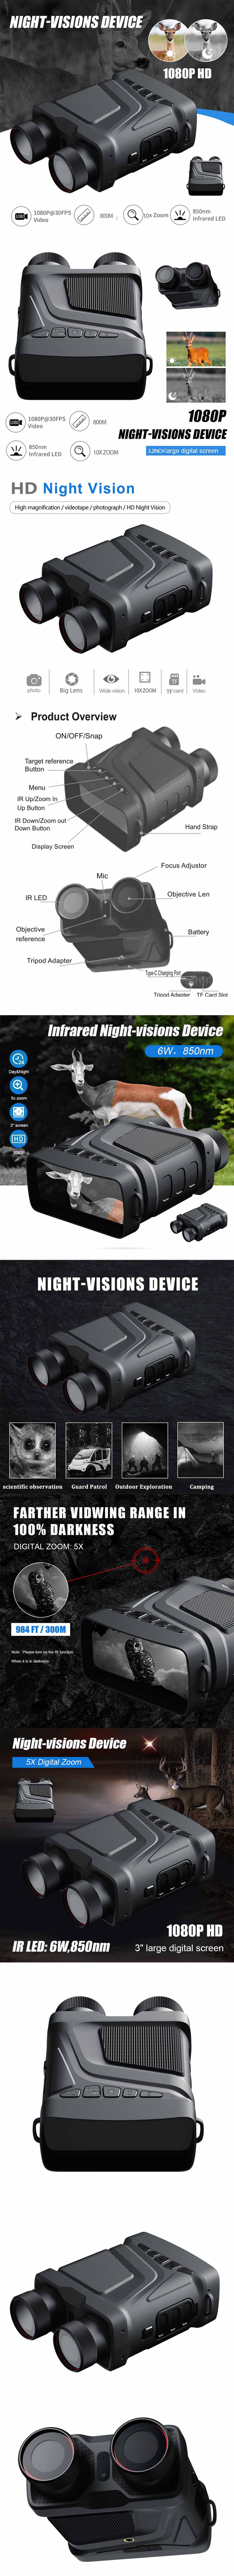 N002 10X Zoom Digital Infrared Night Vision Binocular Telescope for Hunting Camping Professional 1080P 800M Night Vision Device